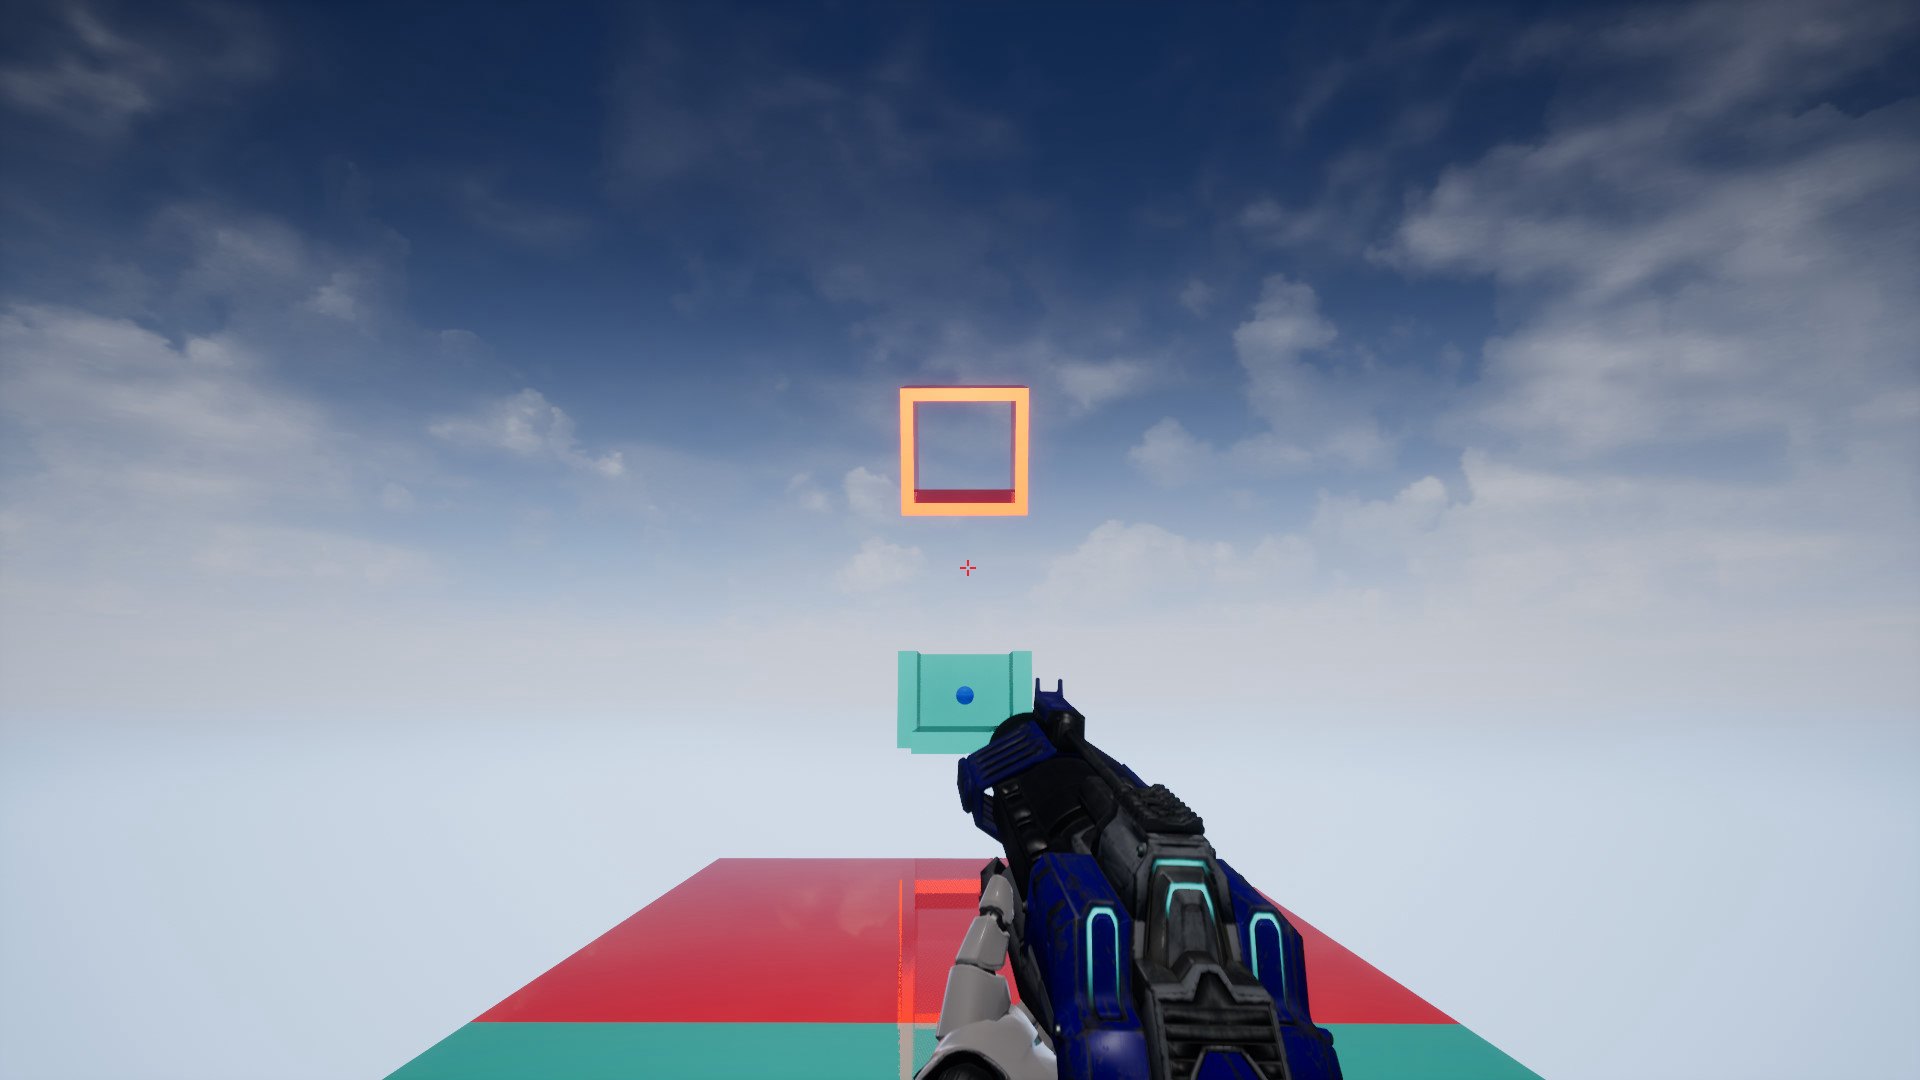 FPS - Fun Puzzle Shooter Steam CD Key 0.46 $